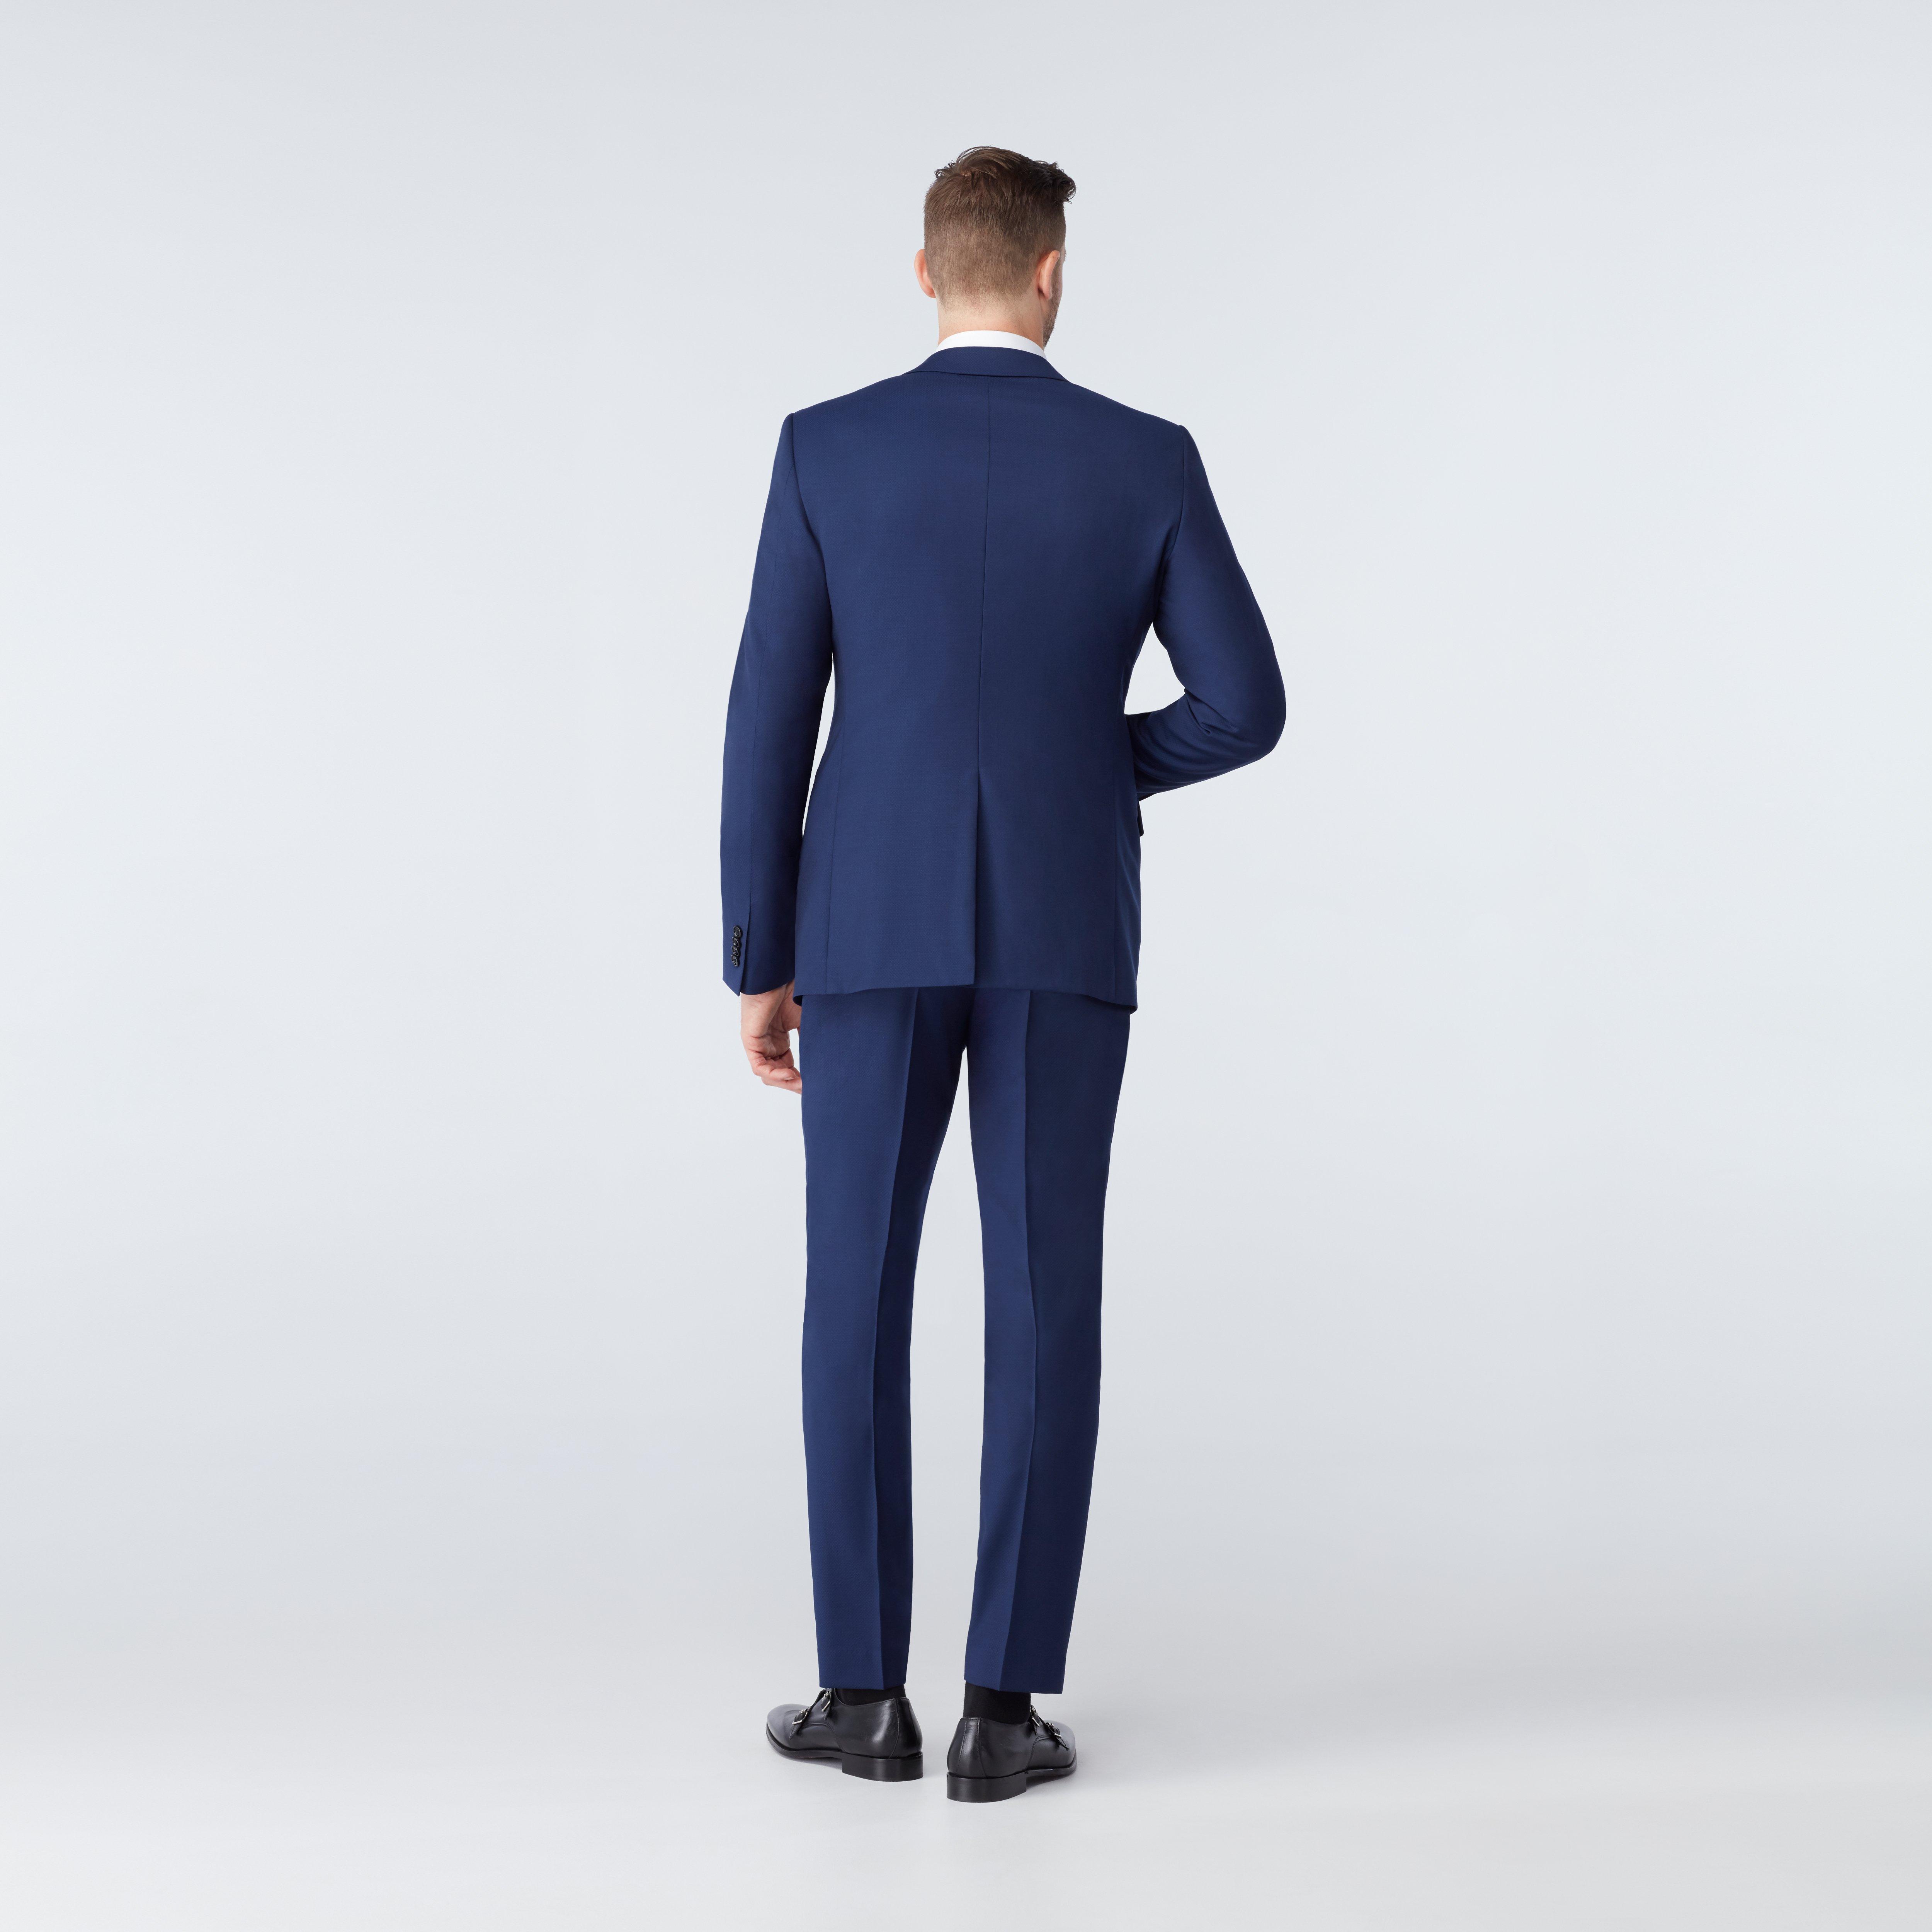 Custom Suits Made For You - Highworth Navy Suit | INDOCHINO